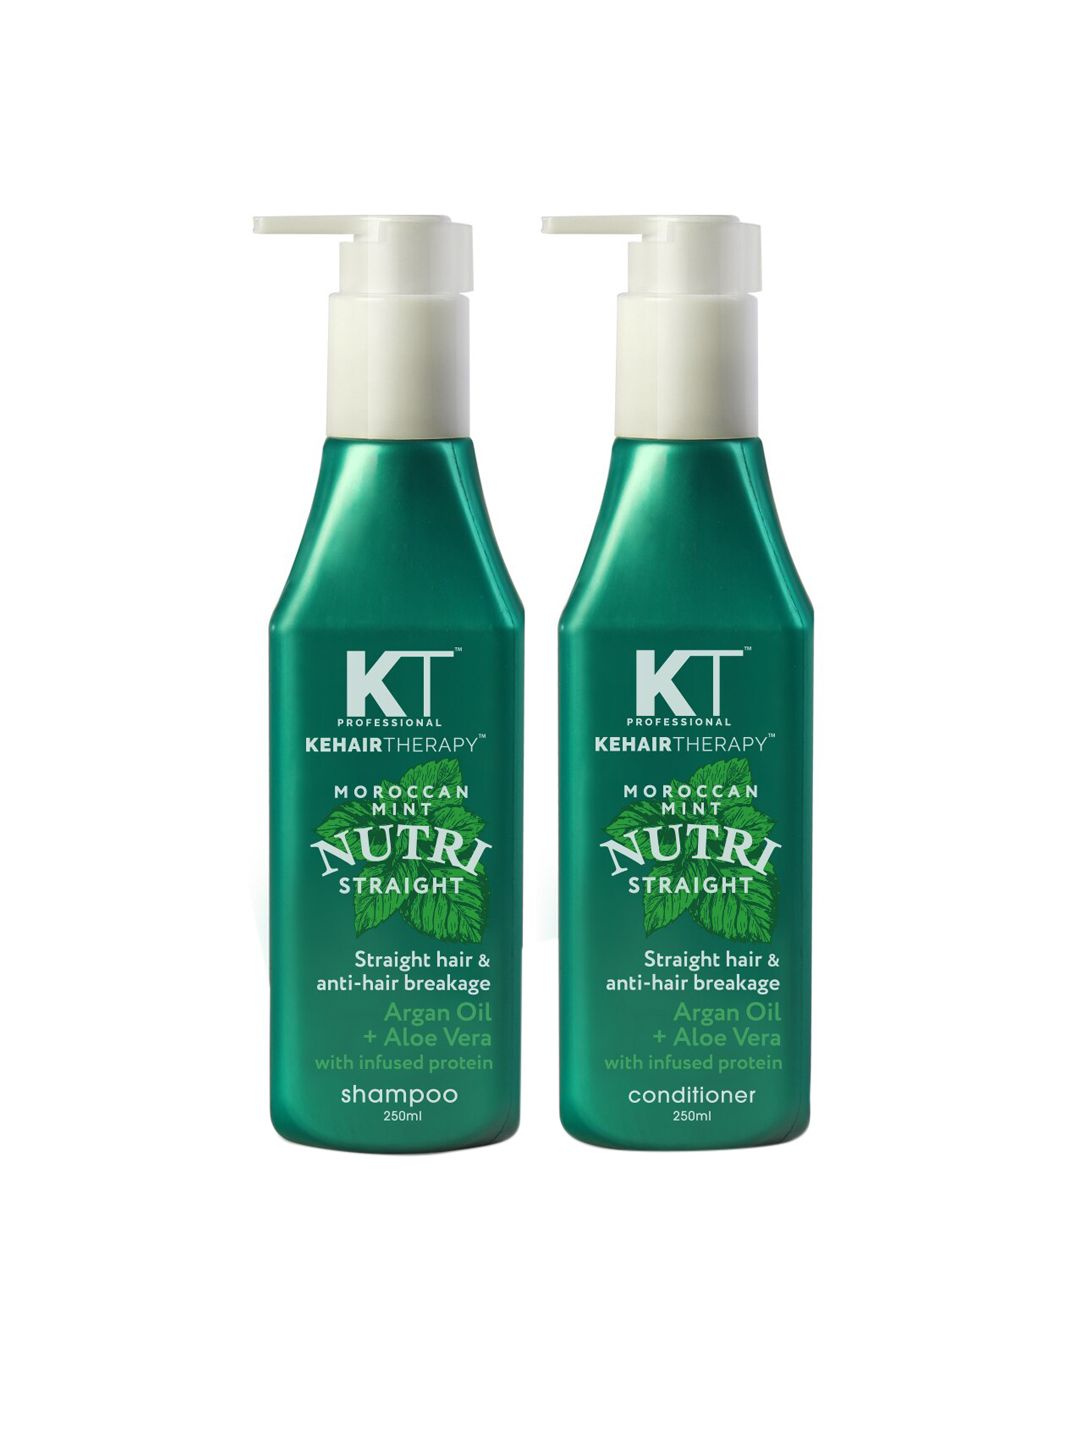 KEHAIRTHERAPY KT Professional Nutri Straight Shampoo & Conditioner 500 ml Price in India